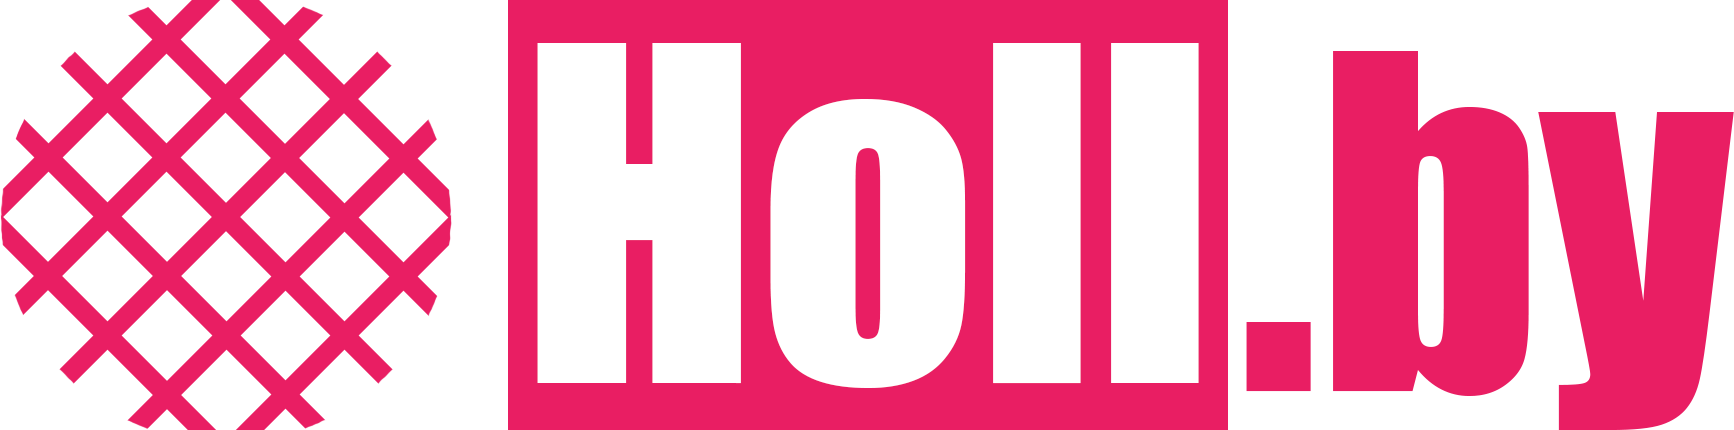 Holl.by